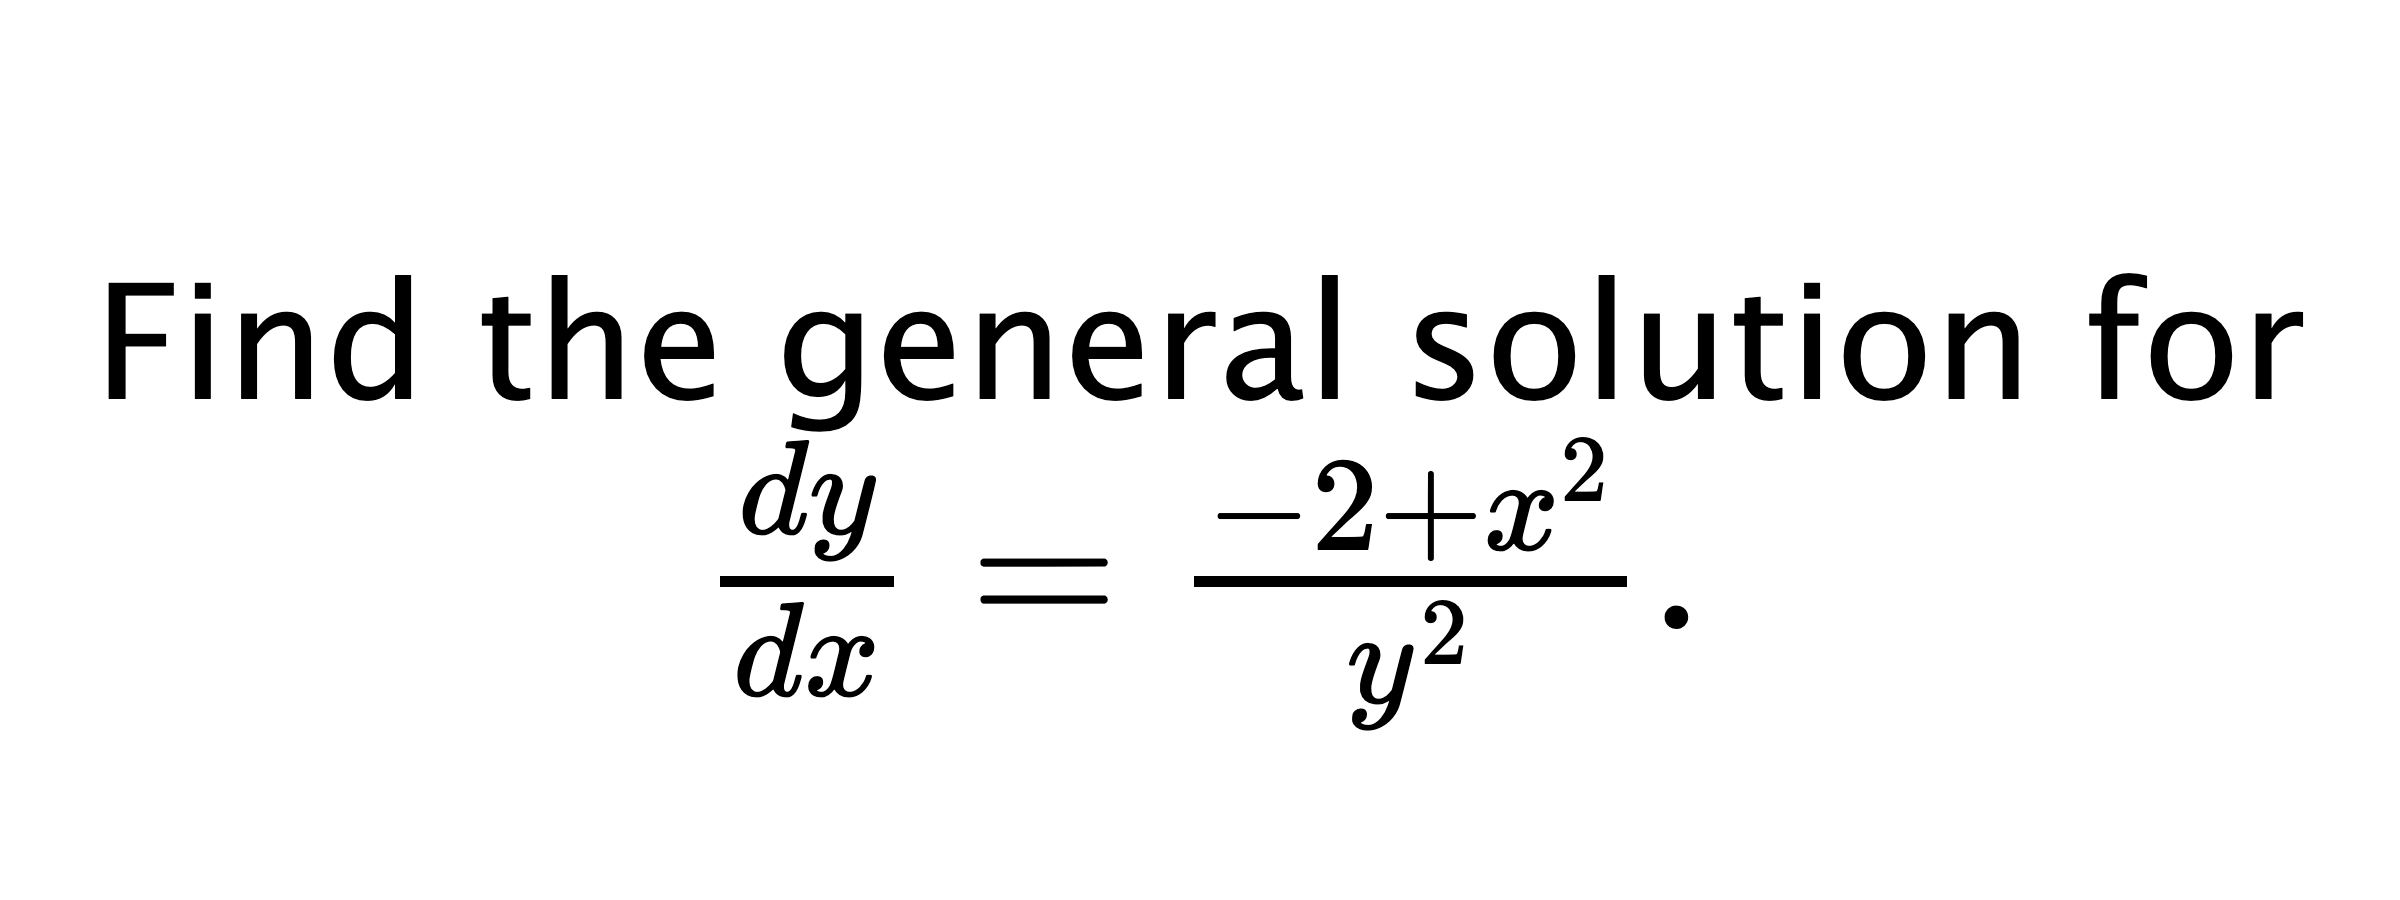  Find the general solution for $ \frac{dy}{dx}=\frac{-2+x^{2}}{y^{2}}. $